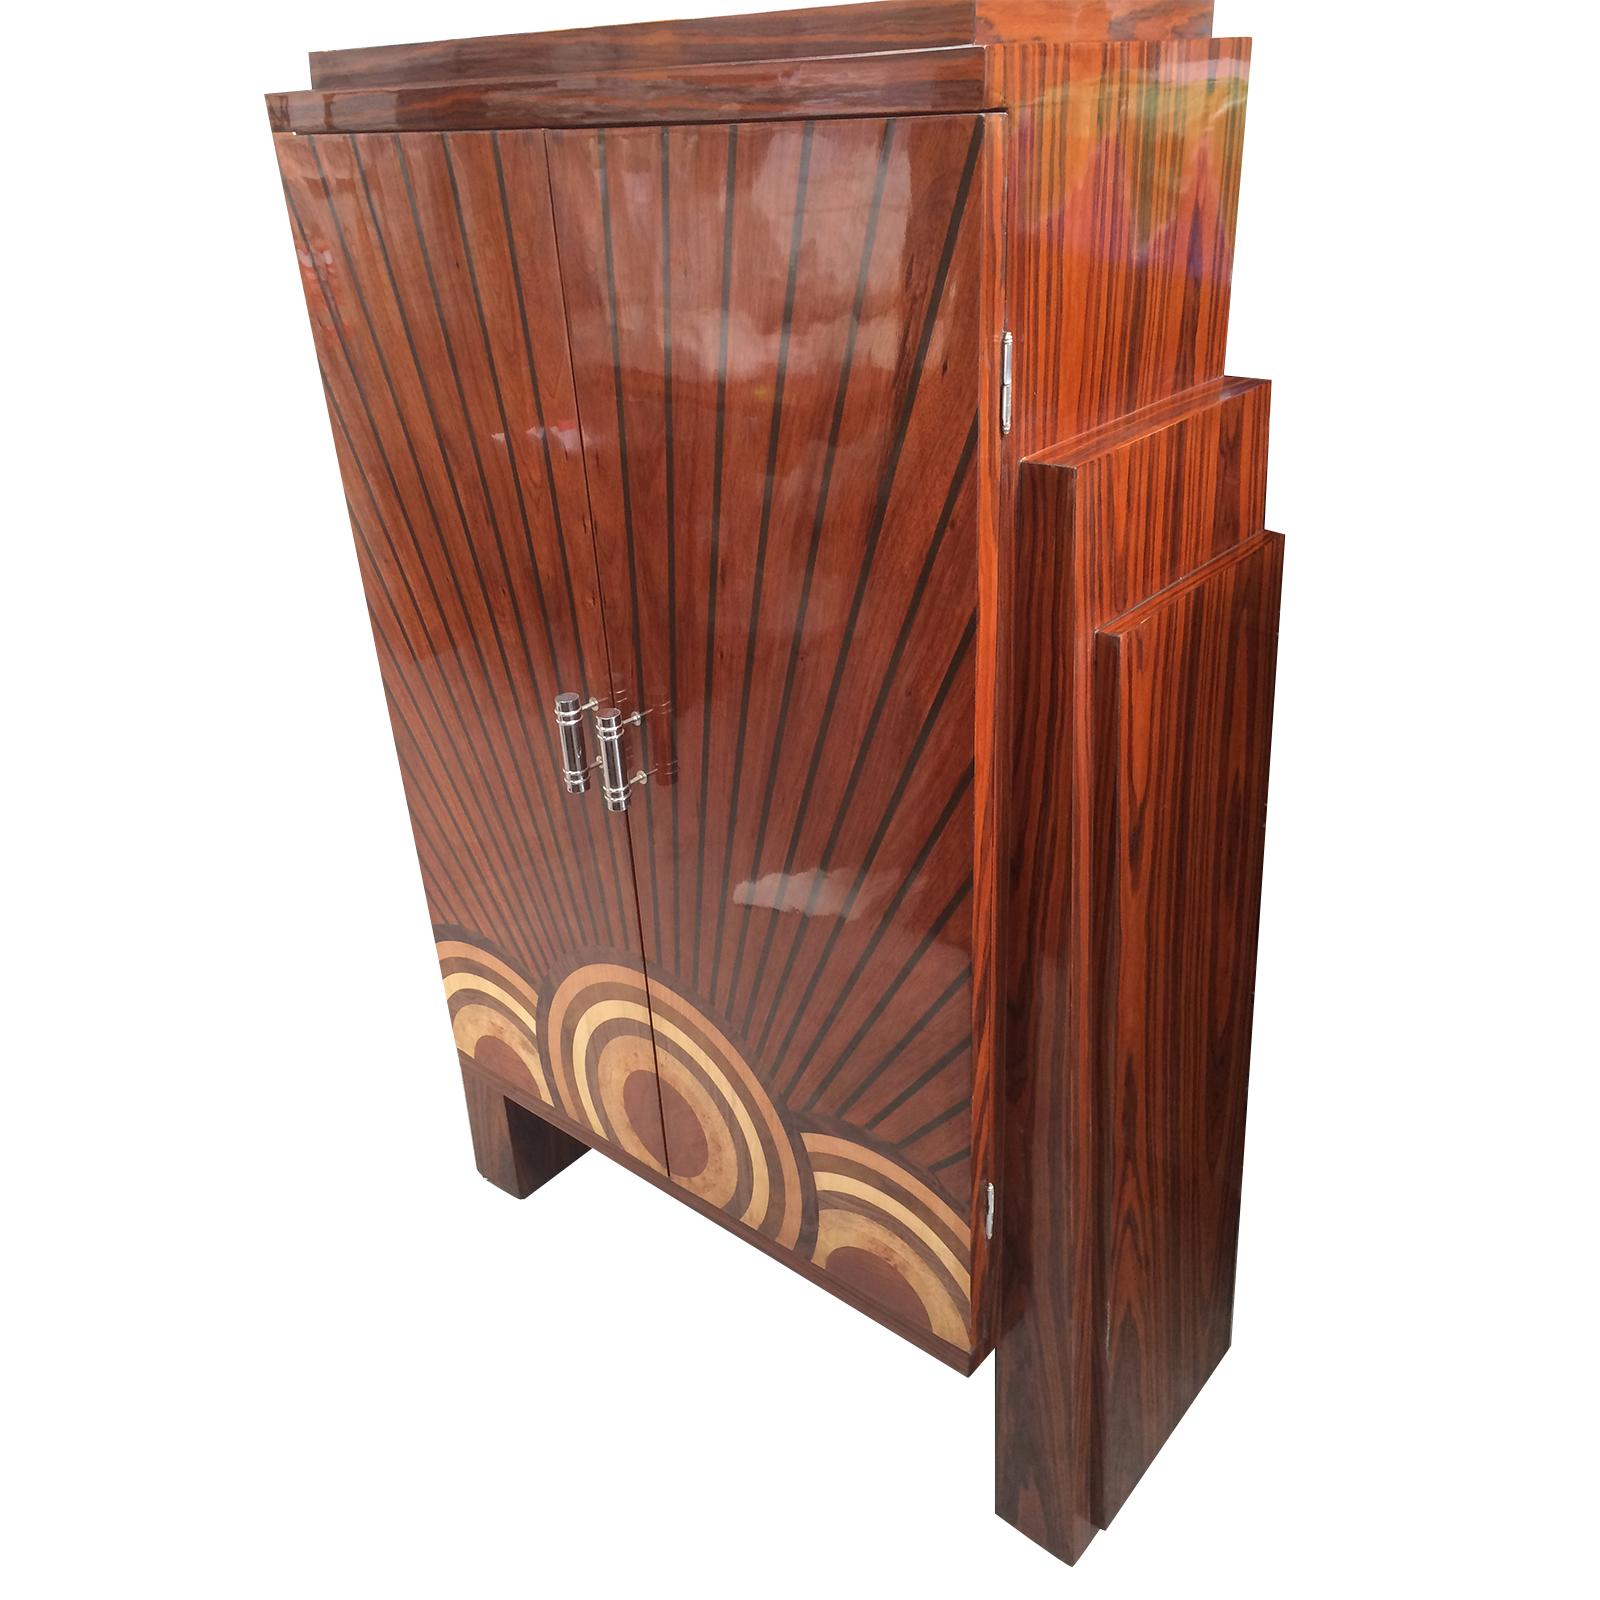 German Art Deco Style Cocktail Cabinet Dry Bar 